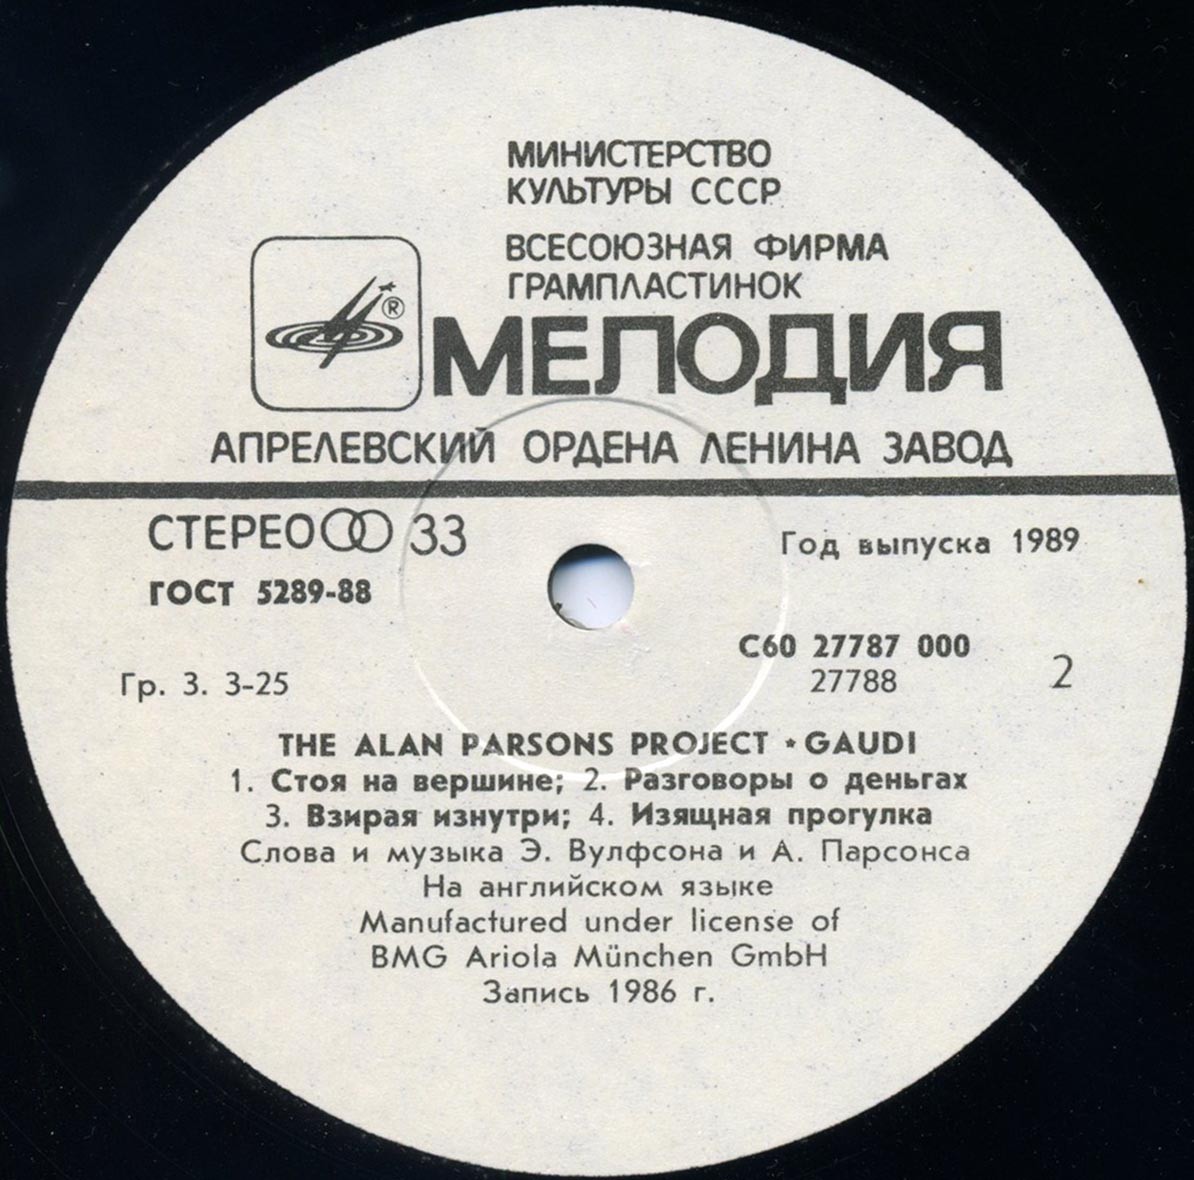 The Alan Parsons Project. Gaudi ("Гауди")